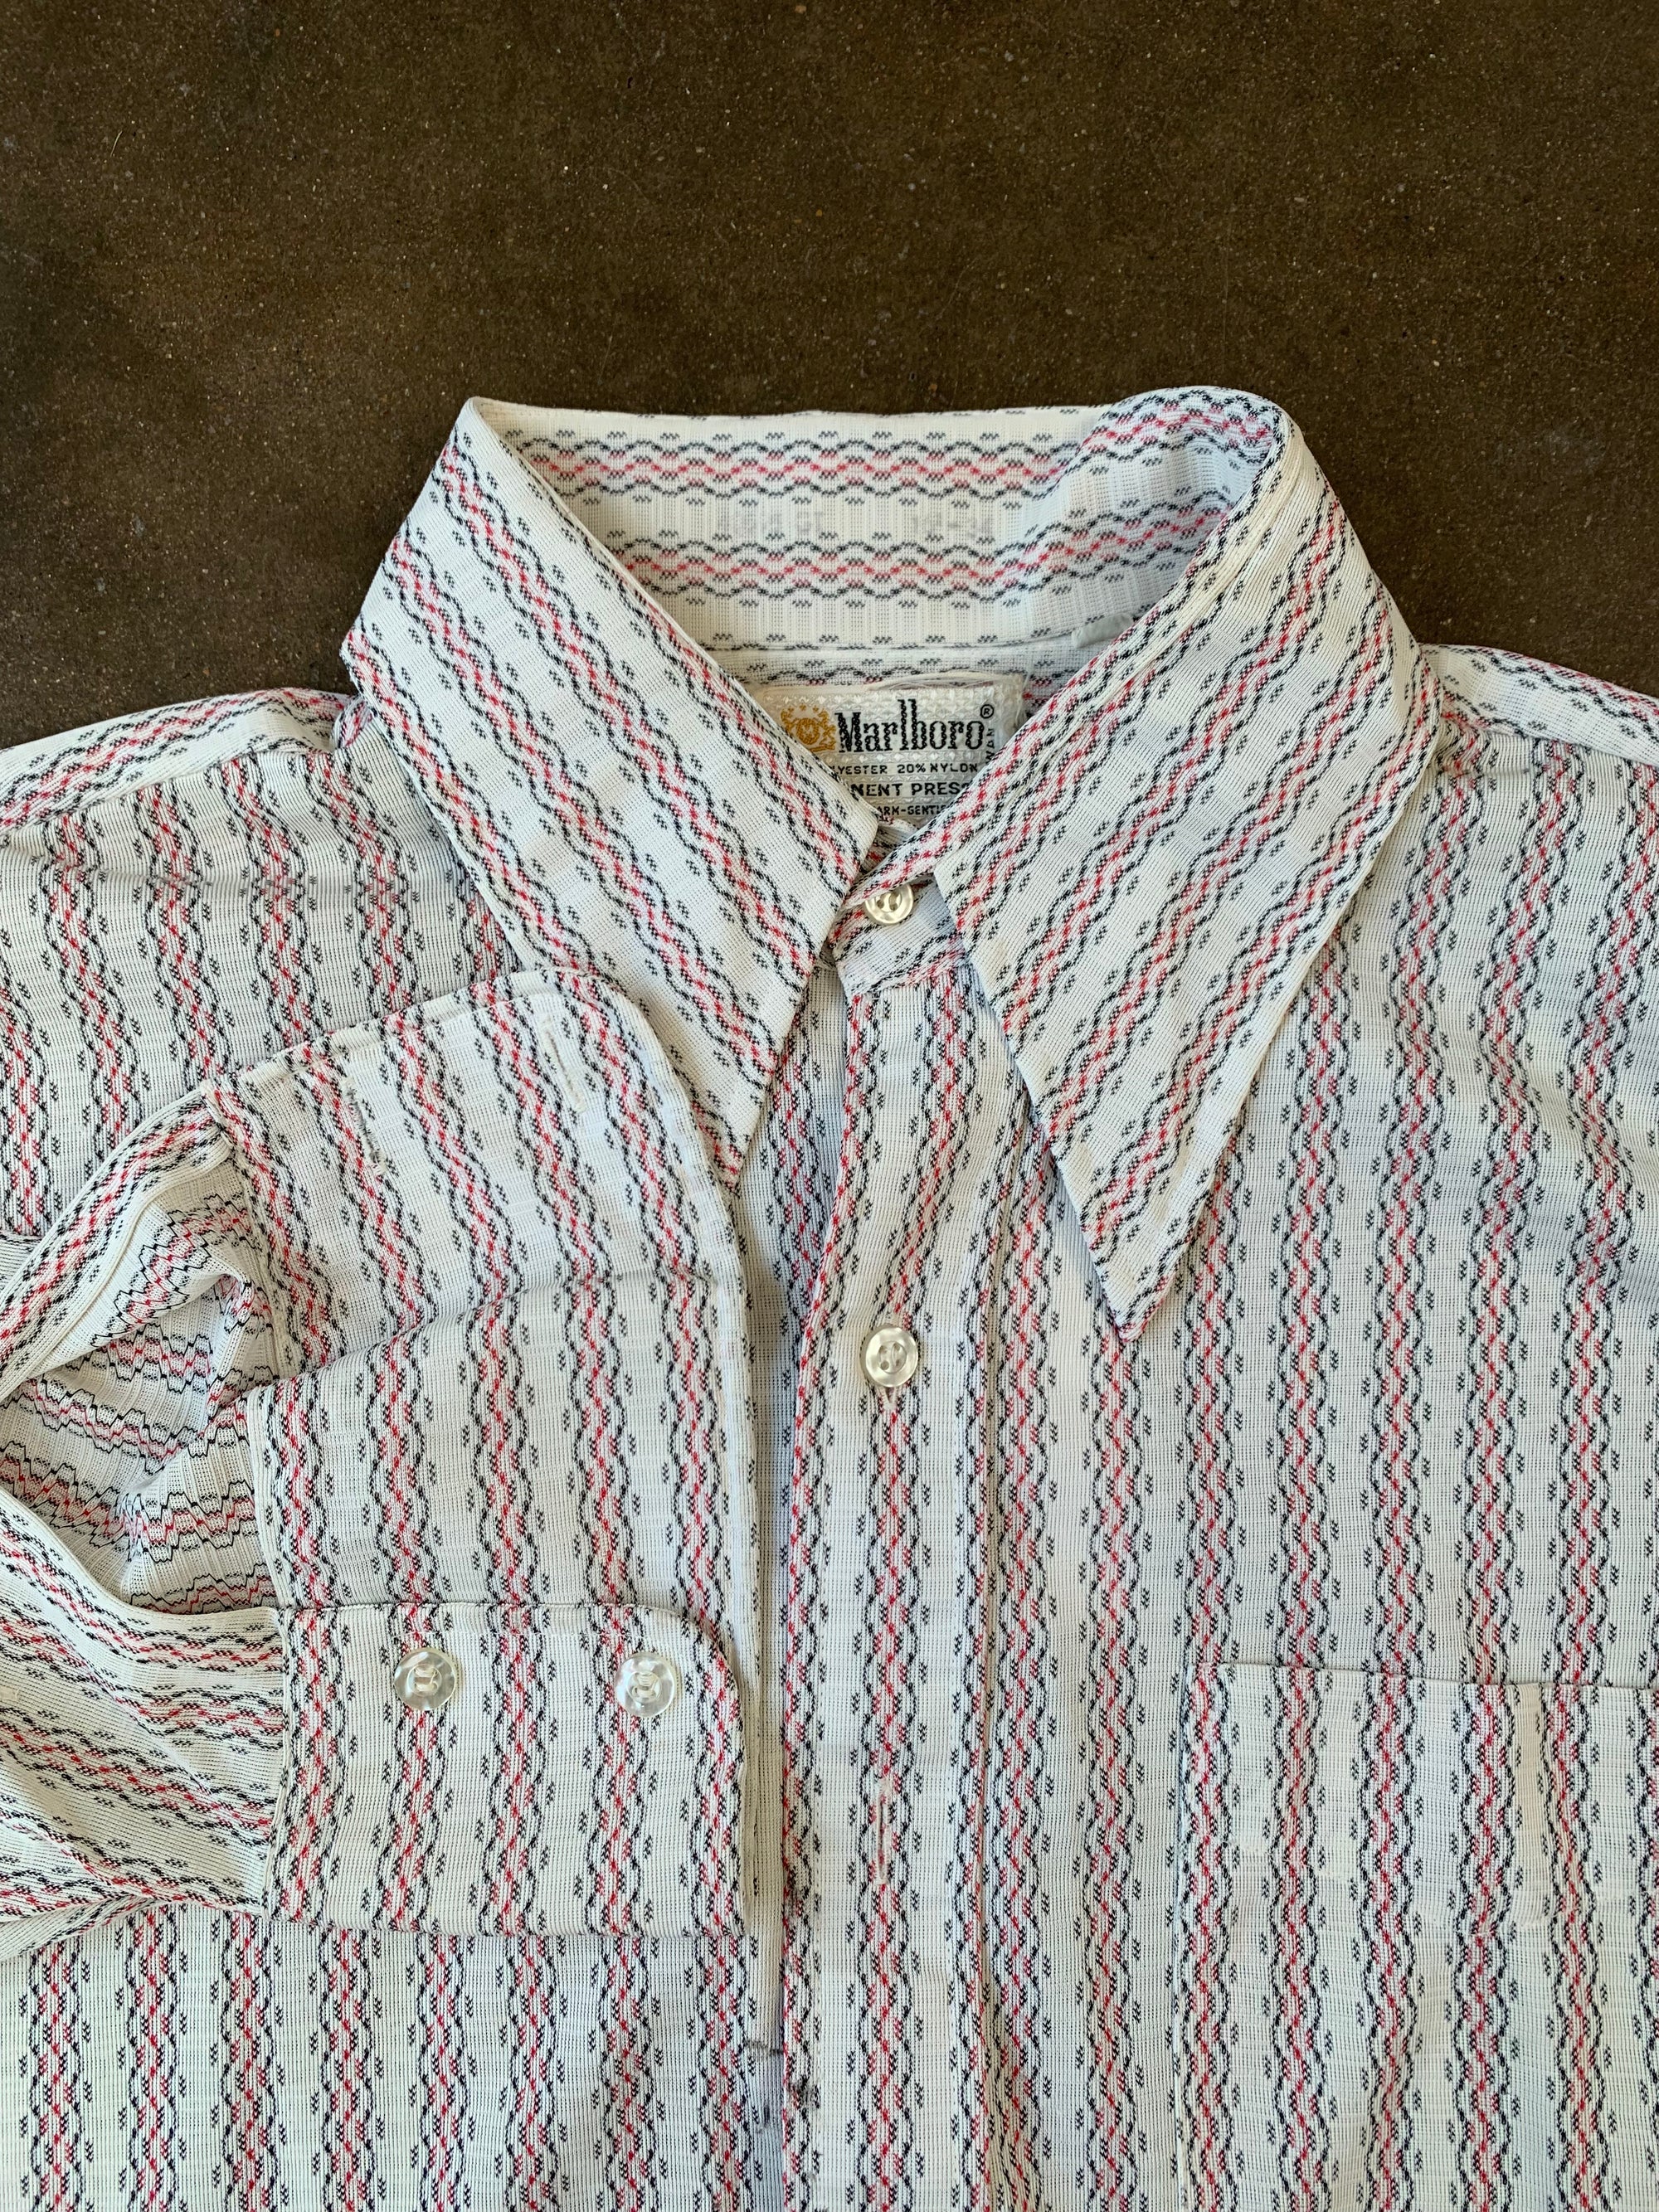 Marlboro Patterned Button Down